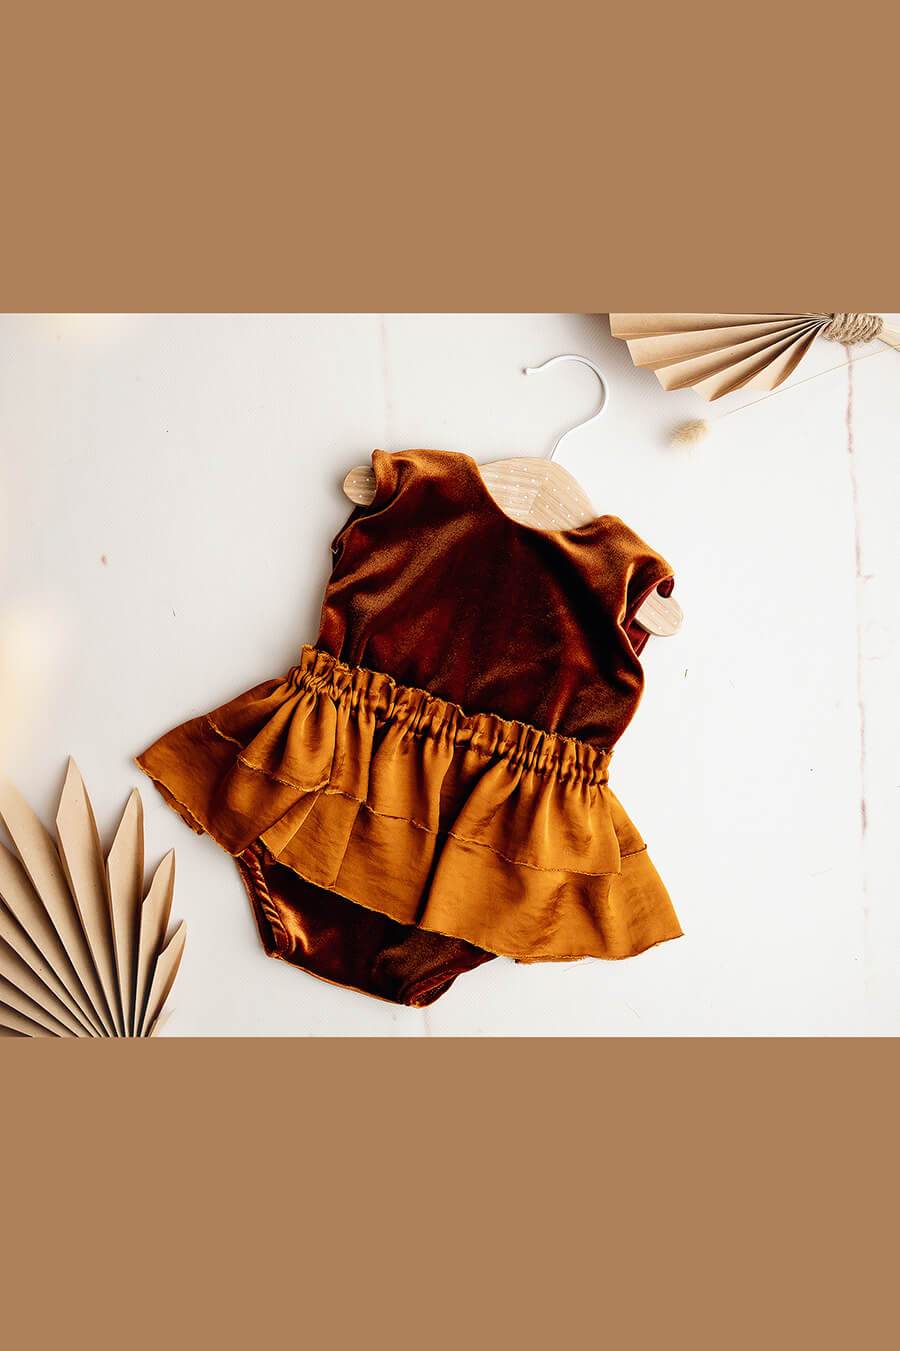 A little girls romper is laying on the ground. The romper is velour with a little skirt over it. The background is white